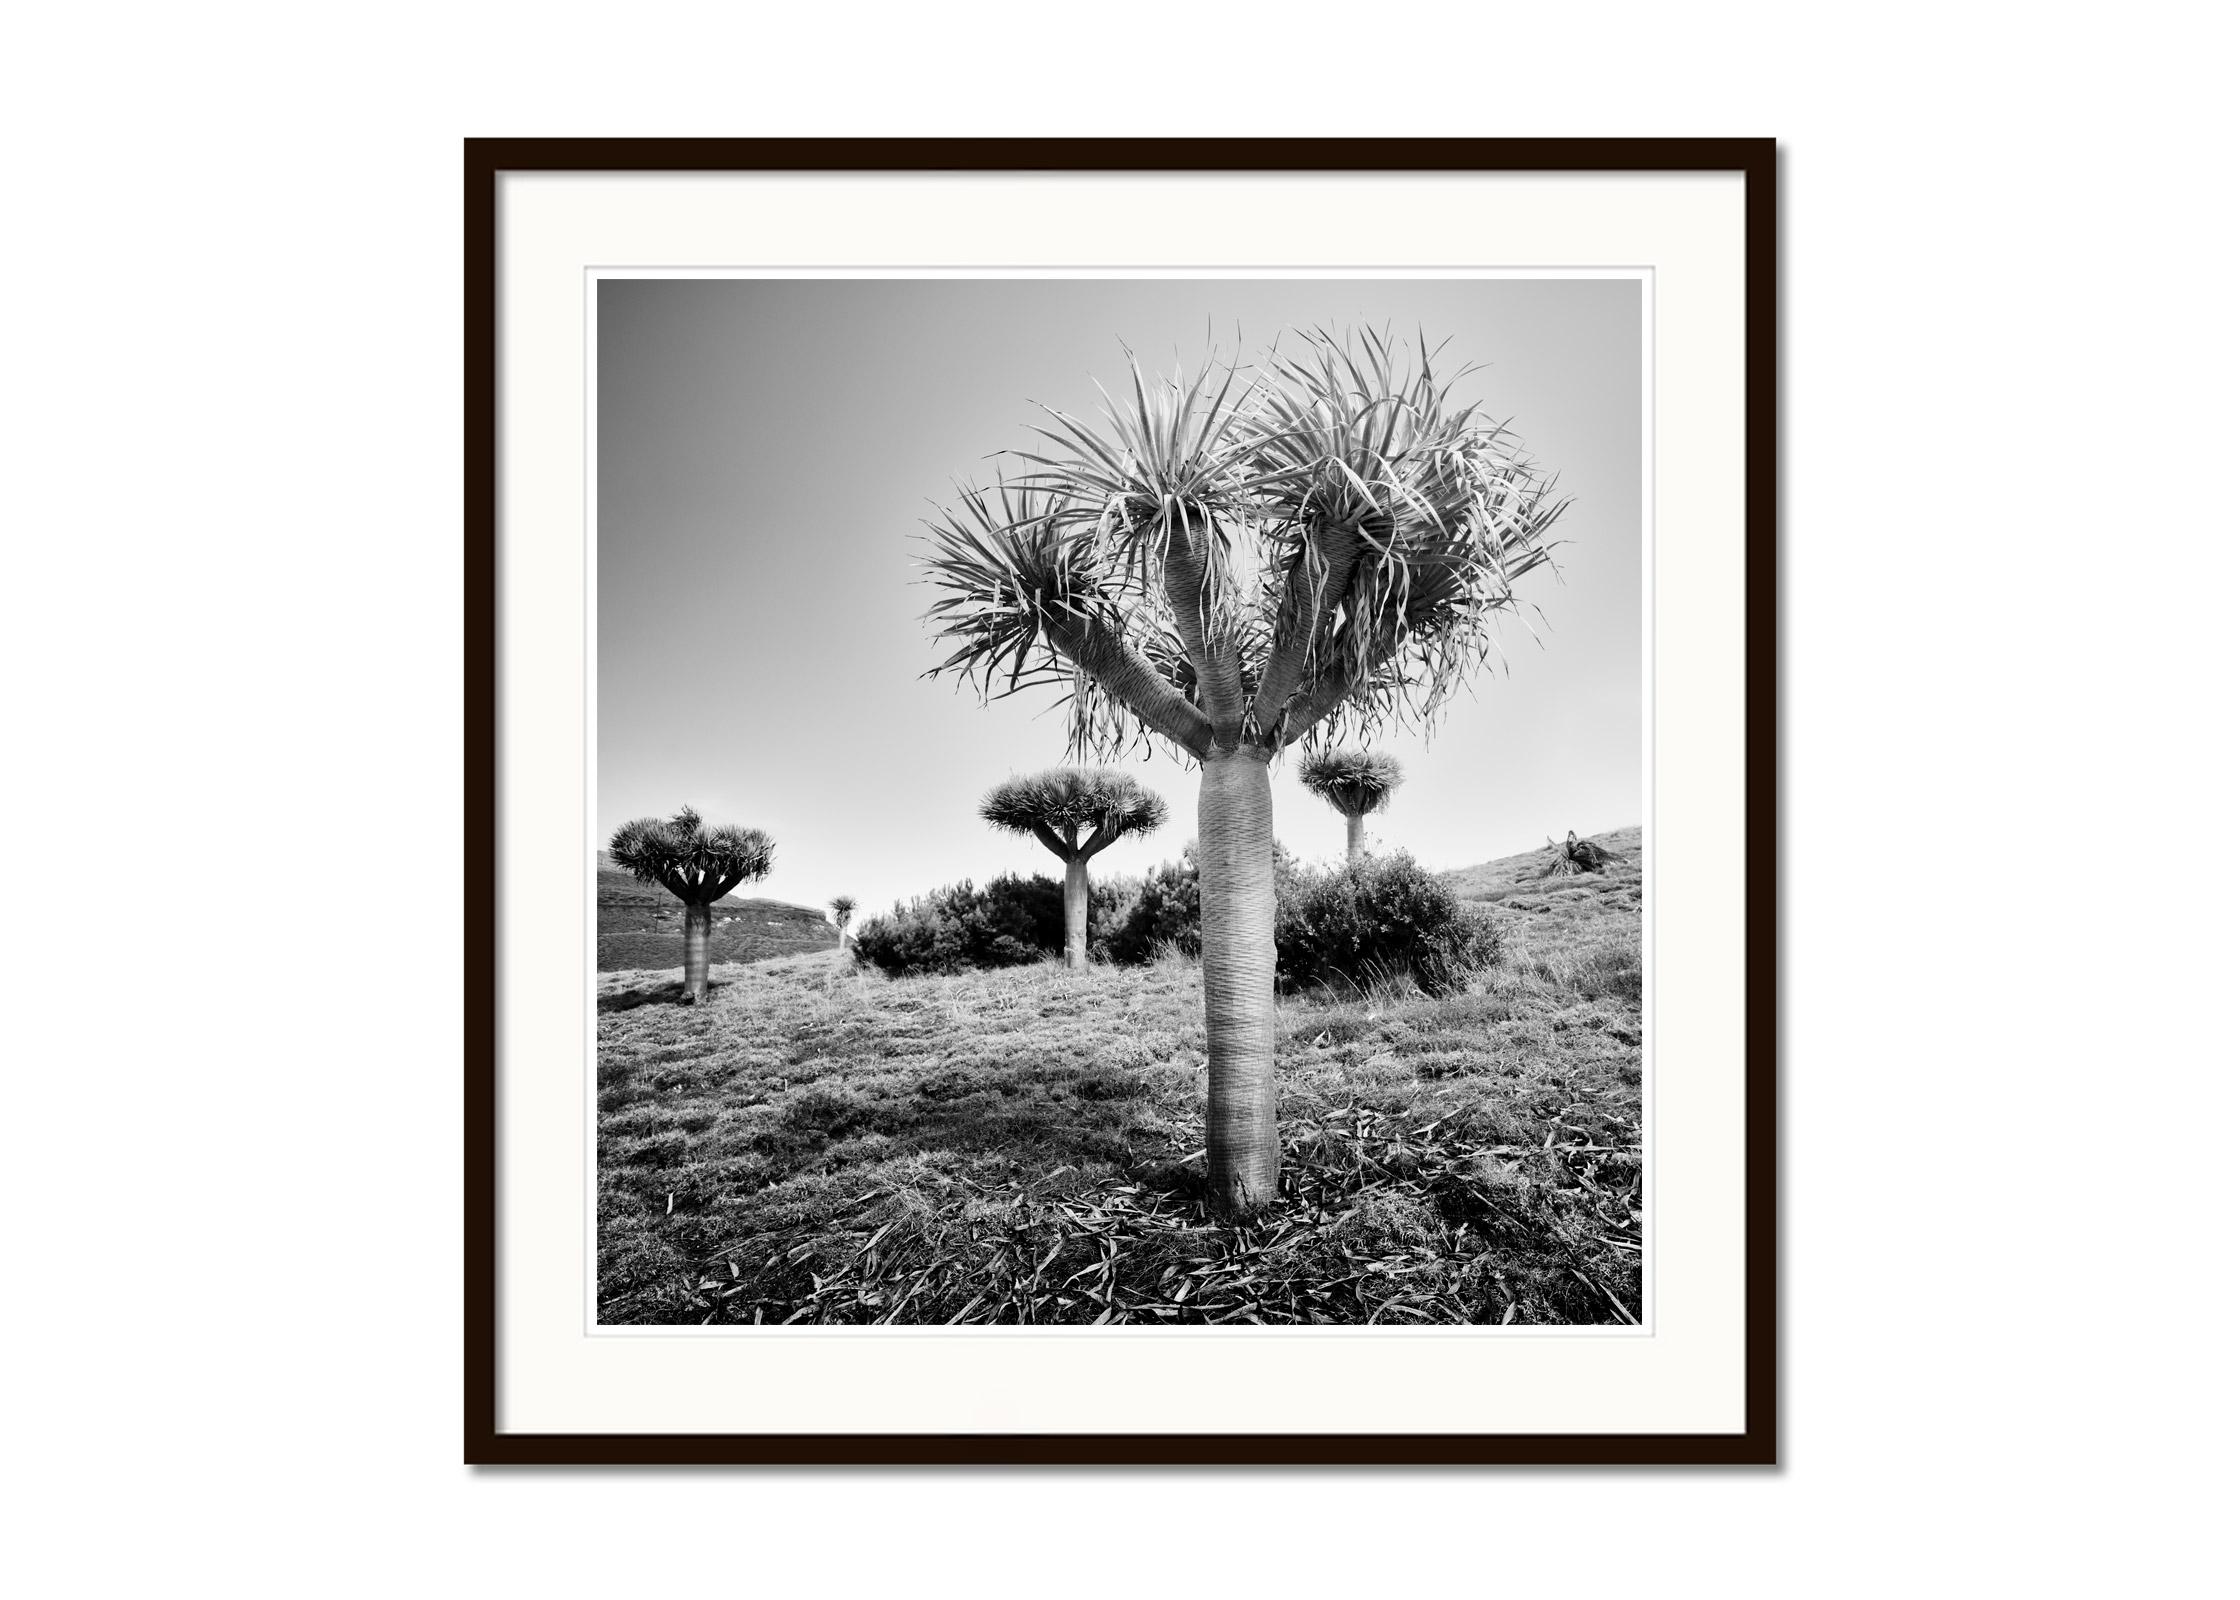 Black and White Fine Art landscape photography. Dragon trees on the beautiful island of Madeira, Portugal. Archival pigment ink print, edition of 7. Signed, titled, dated and numbered by artist. Certificate of authenticity included. Printed with 4cm